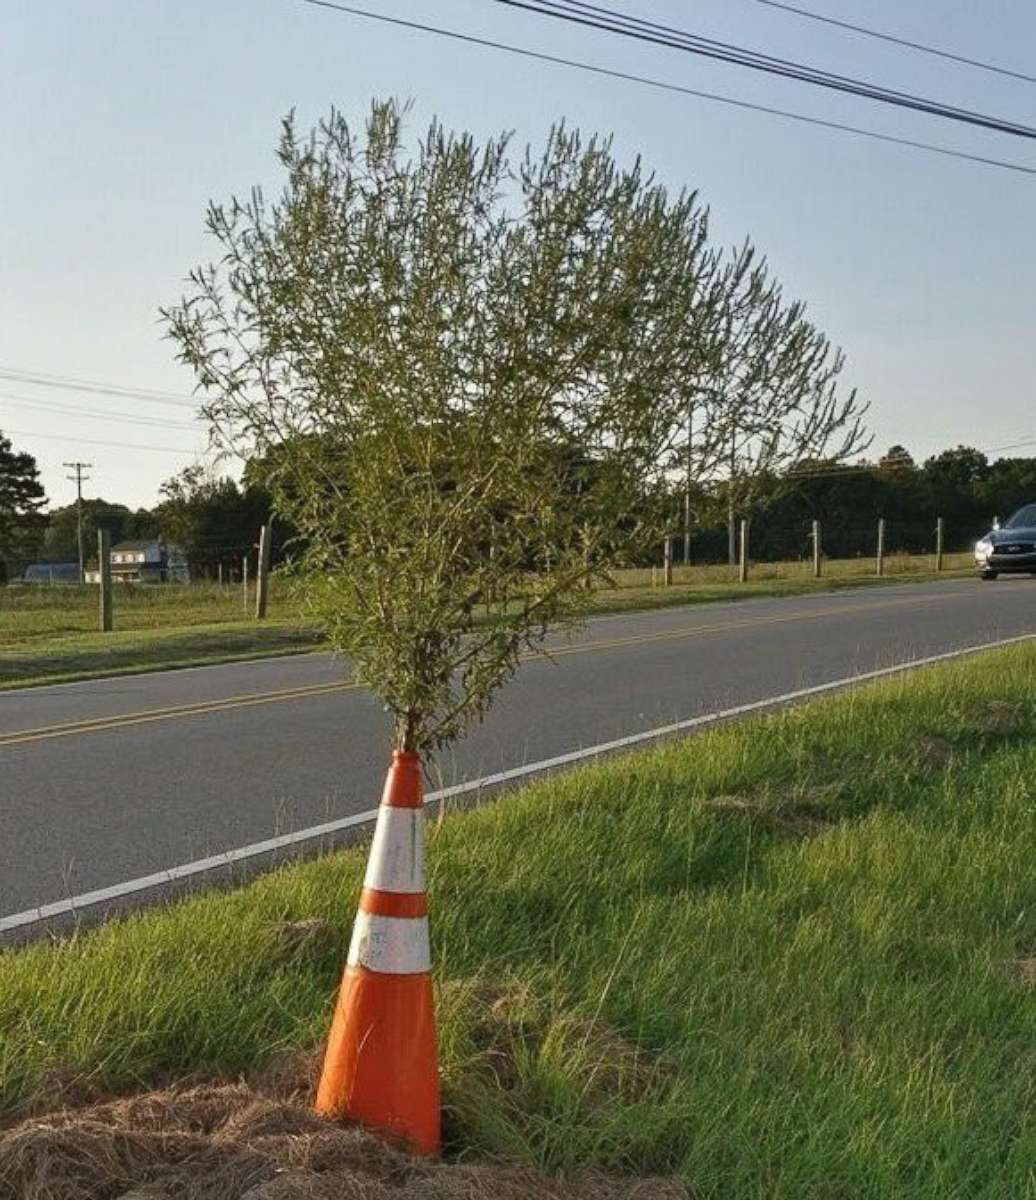 PHOTO: "Cone Weed" has become a sensation in Huntersville, North Carolina after someone anonymously decorated it for the holidays.